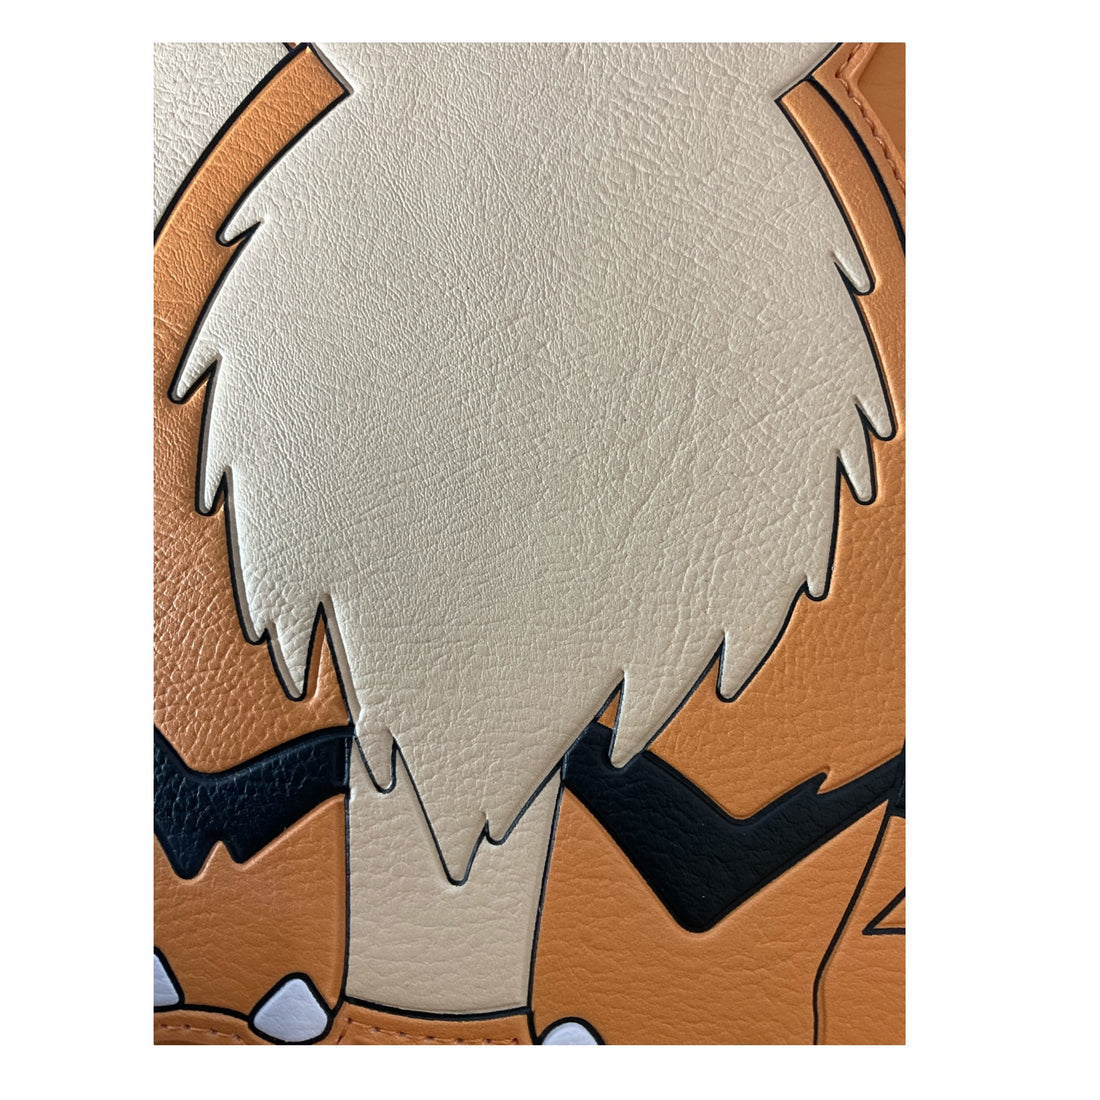 Loungefly Pokemon Growlithe Cosplay 707 Street Exclusive Mini Backpack (Imperfect Bag)